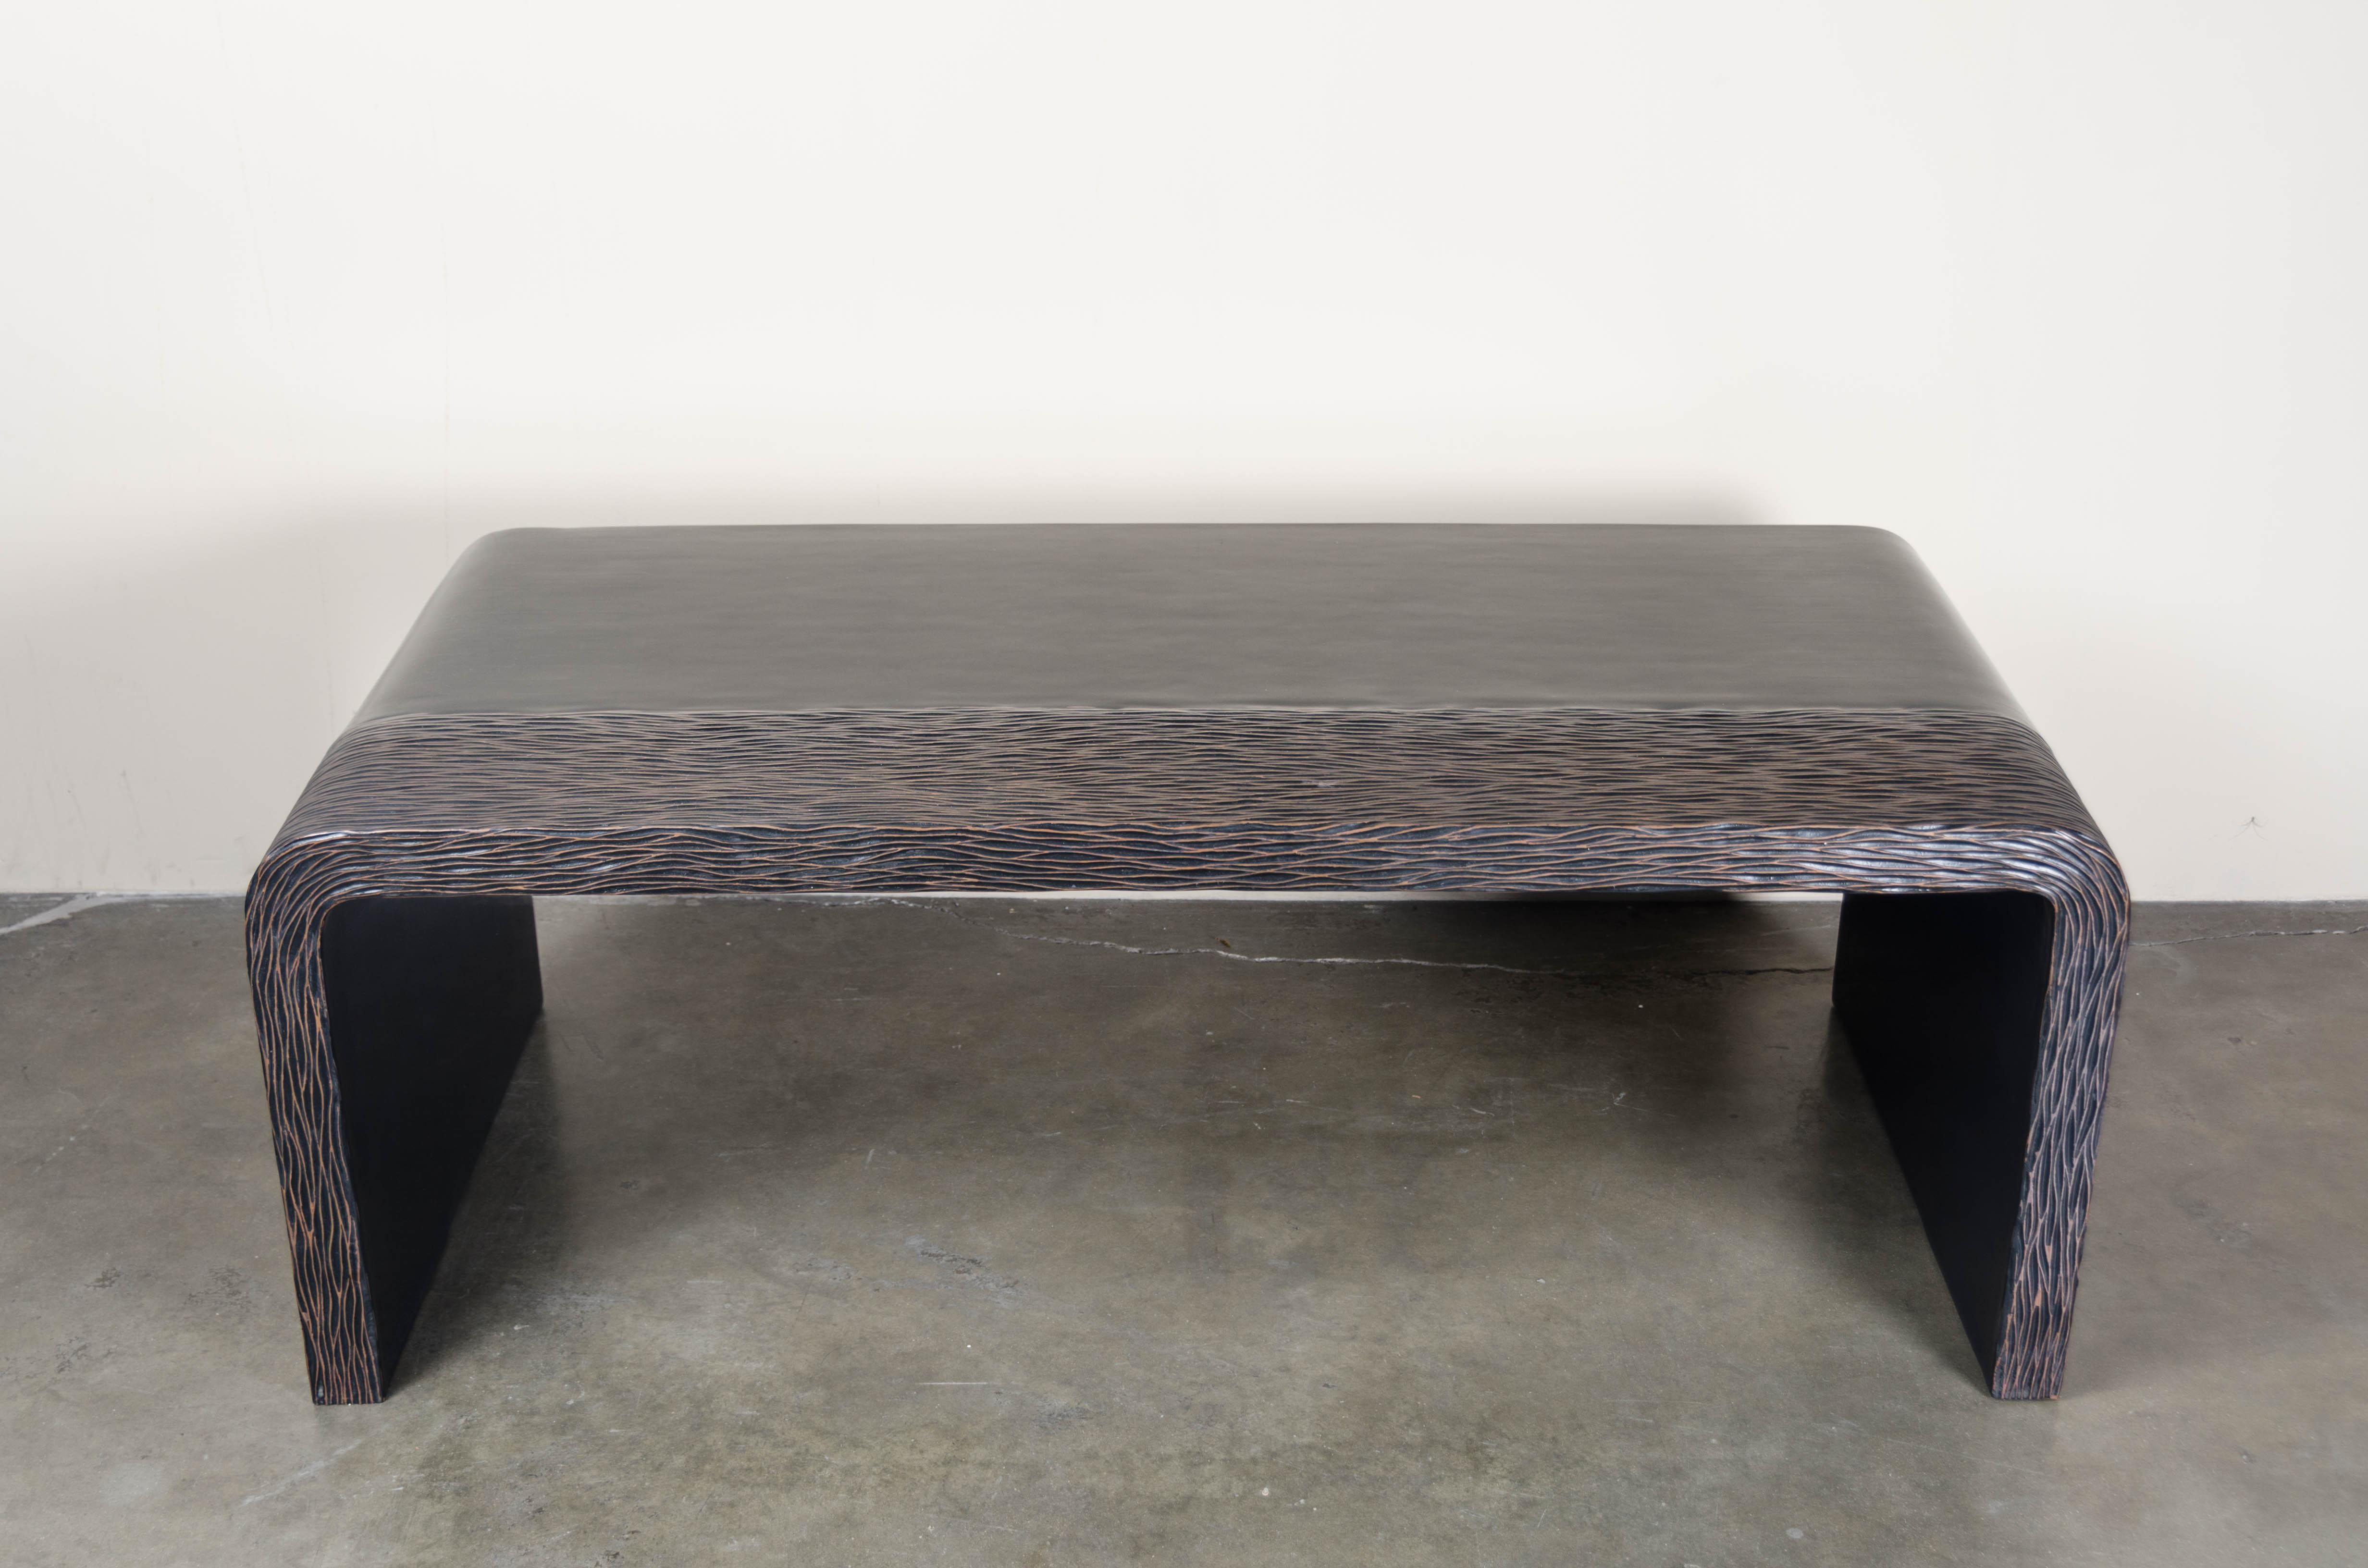 Repoussé Pleats Coffee Table, Black Lacquer and Copper by Robert Kuo, Limited Edition